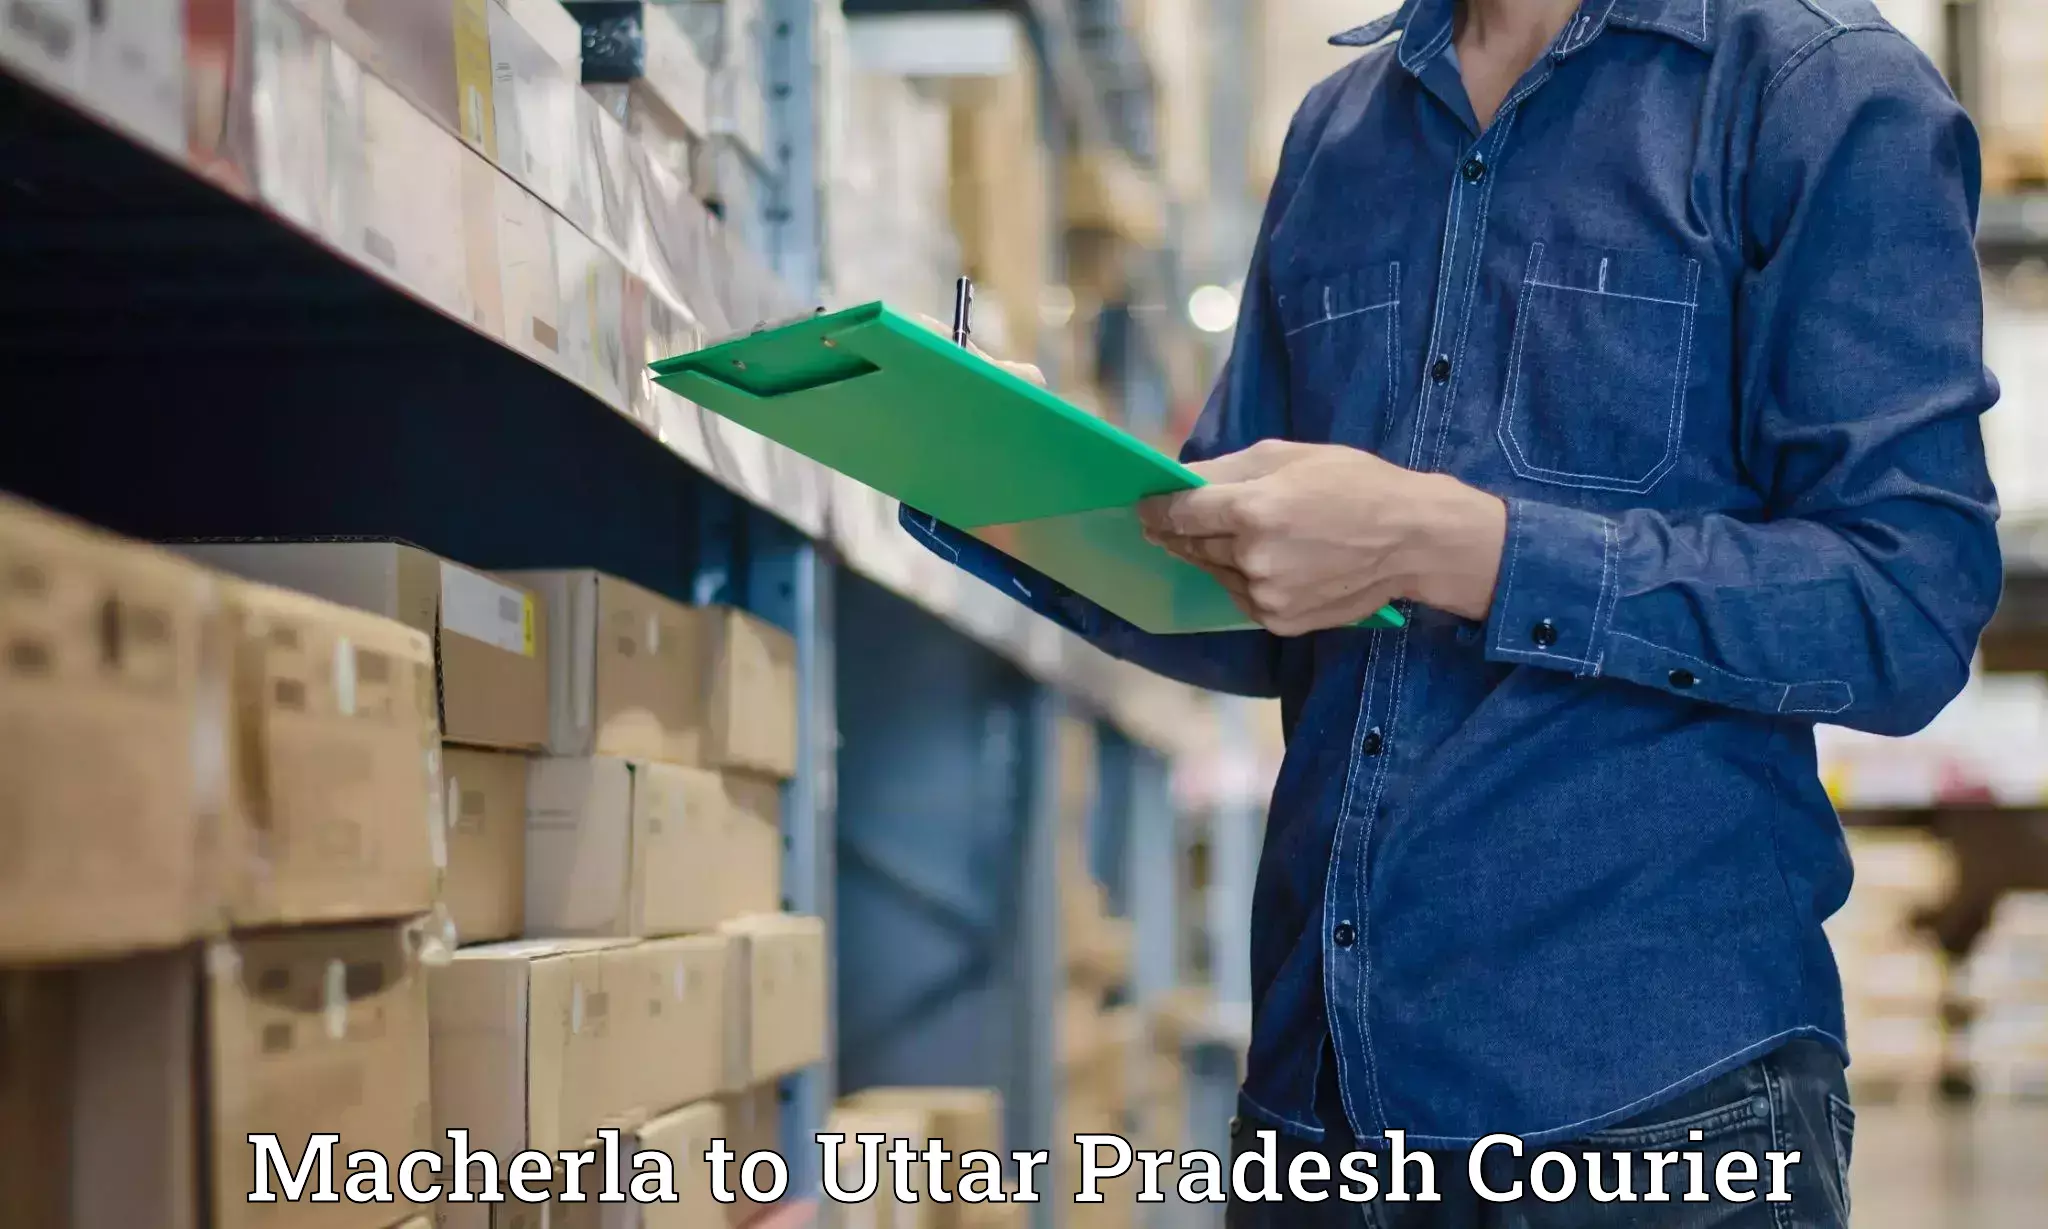 Reliable delivery network Macherla to Firozabad